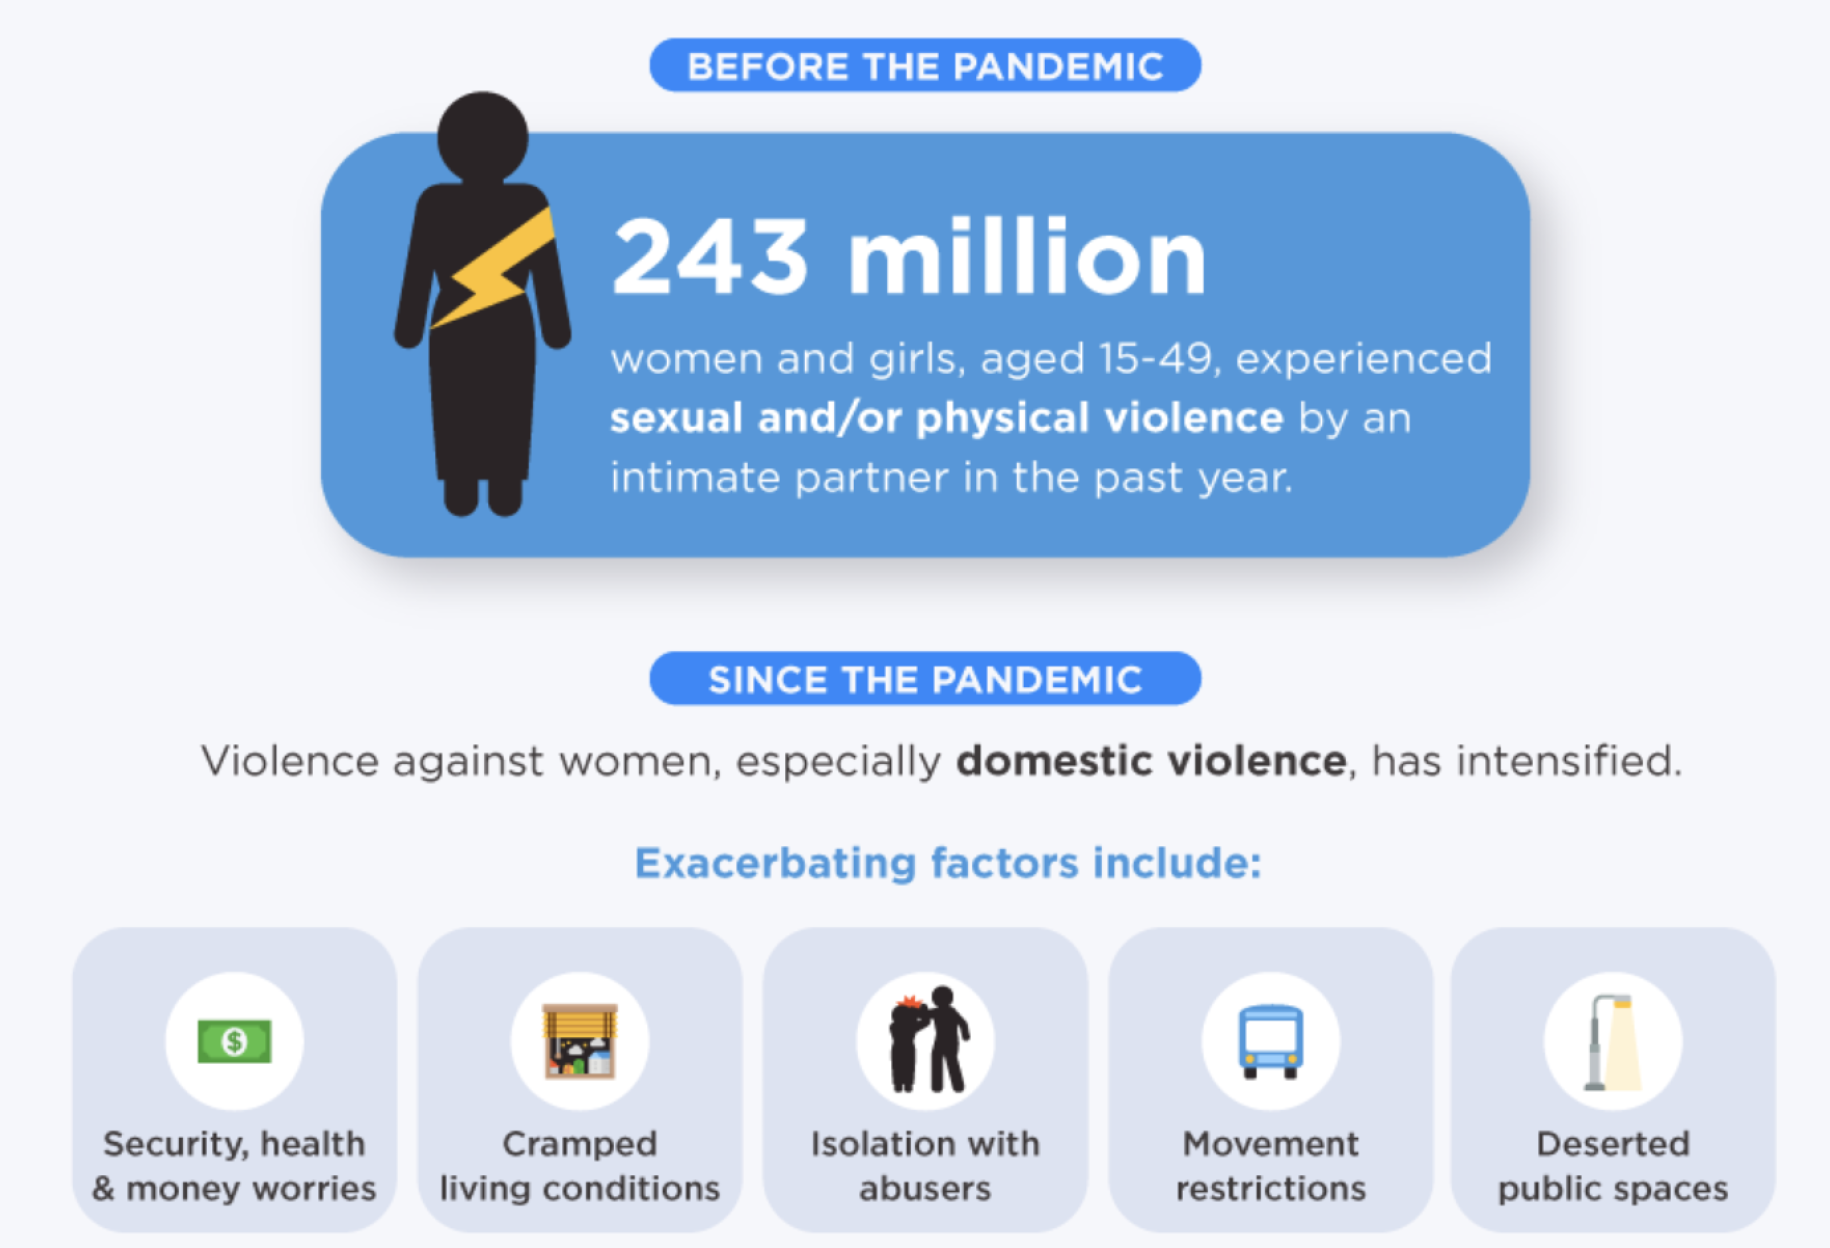 Infographic showing how violence against women has intensified since COVID-19.